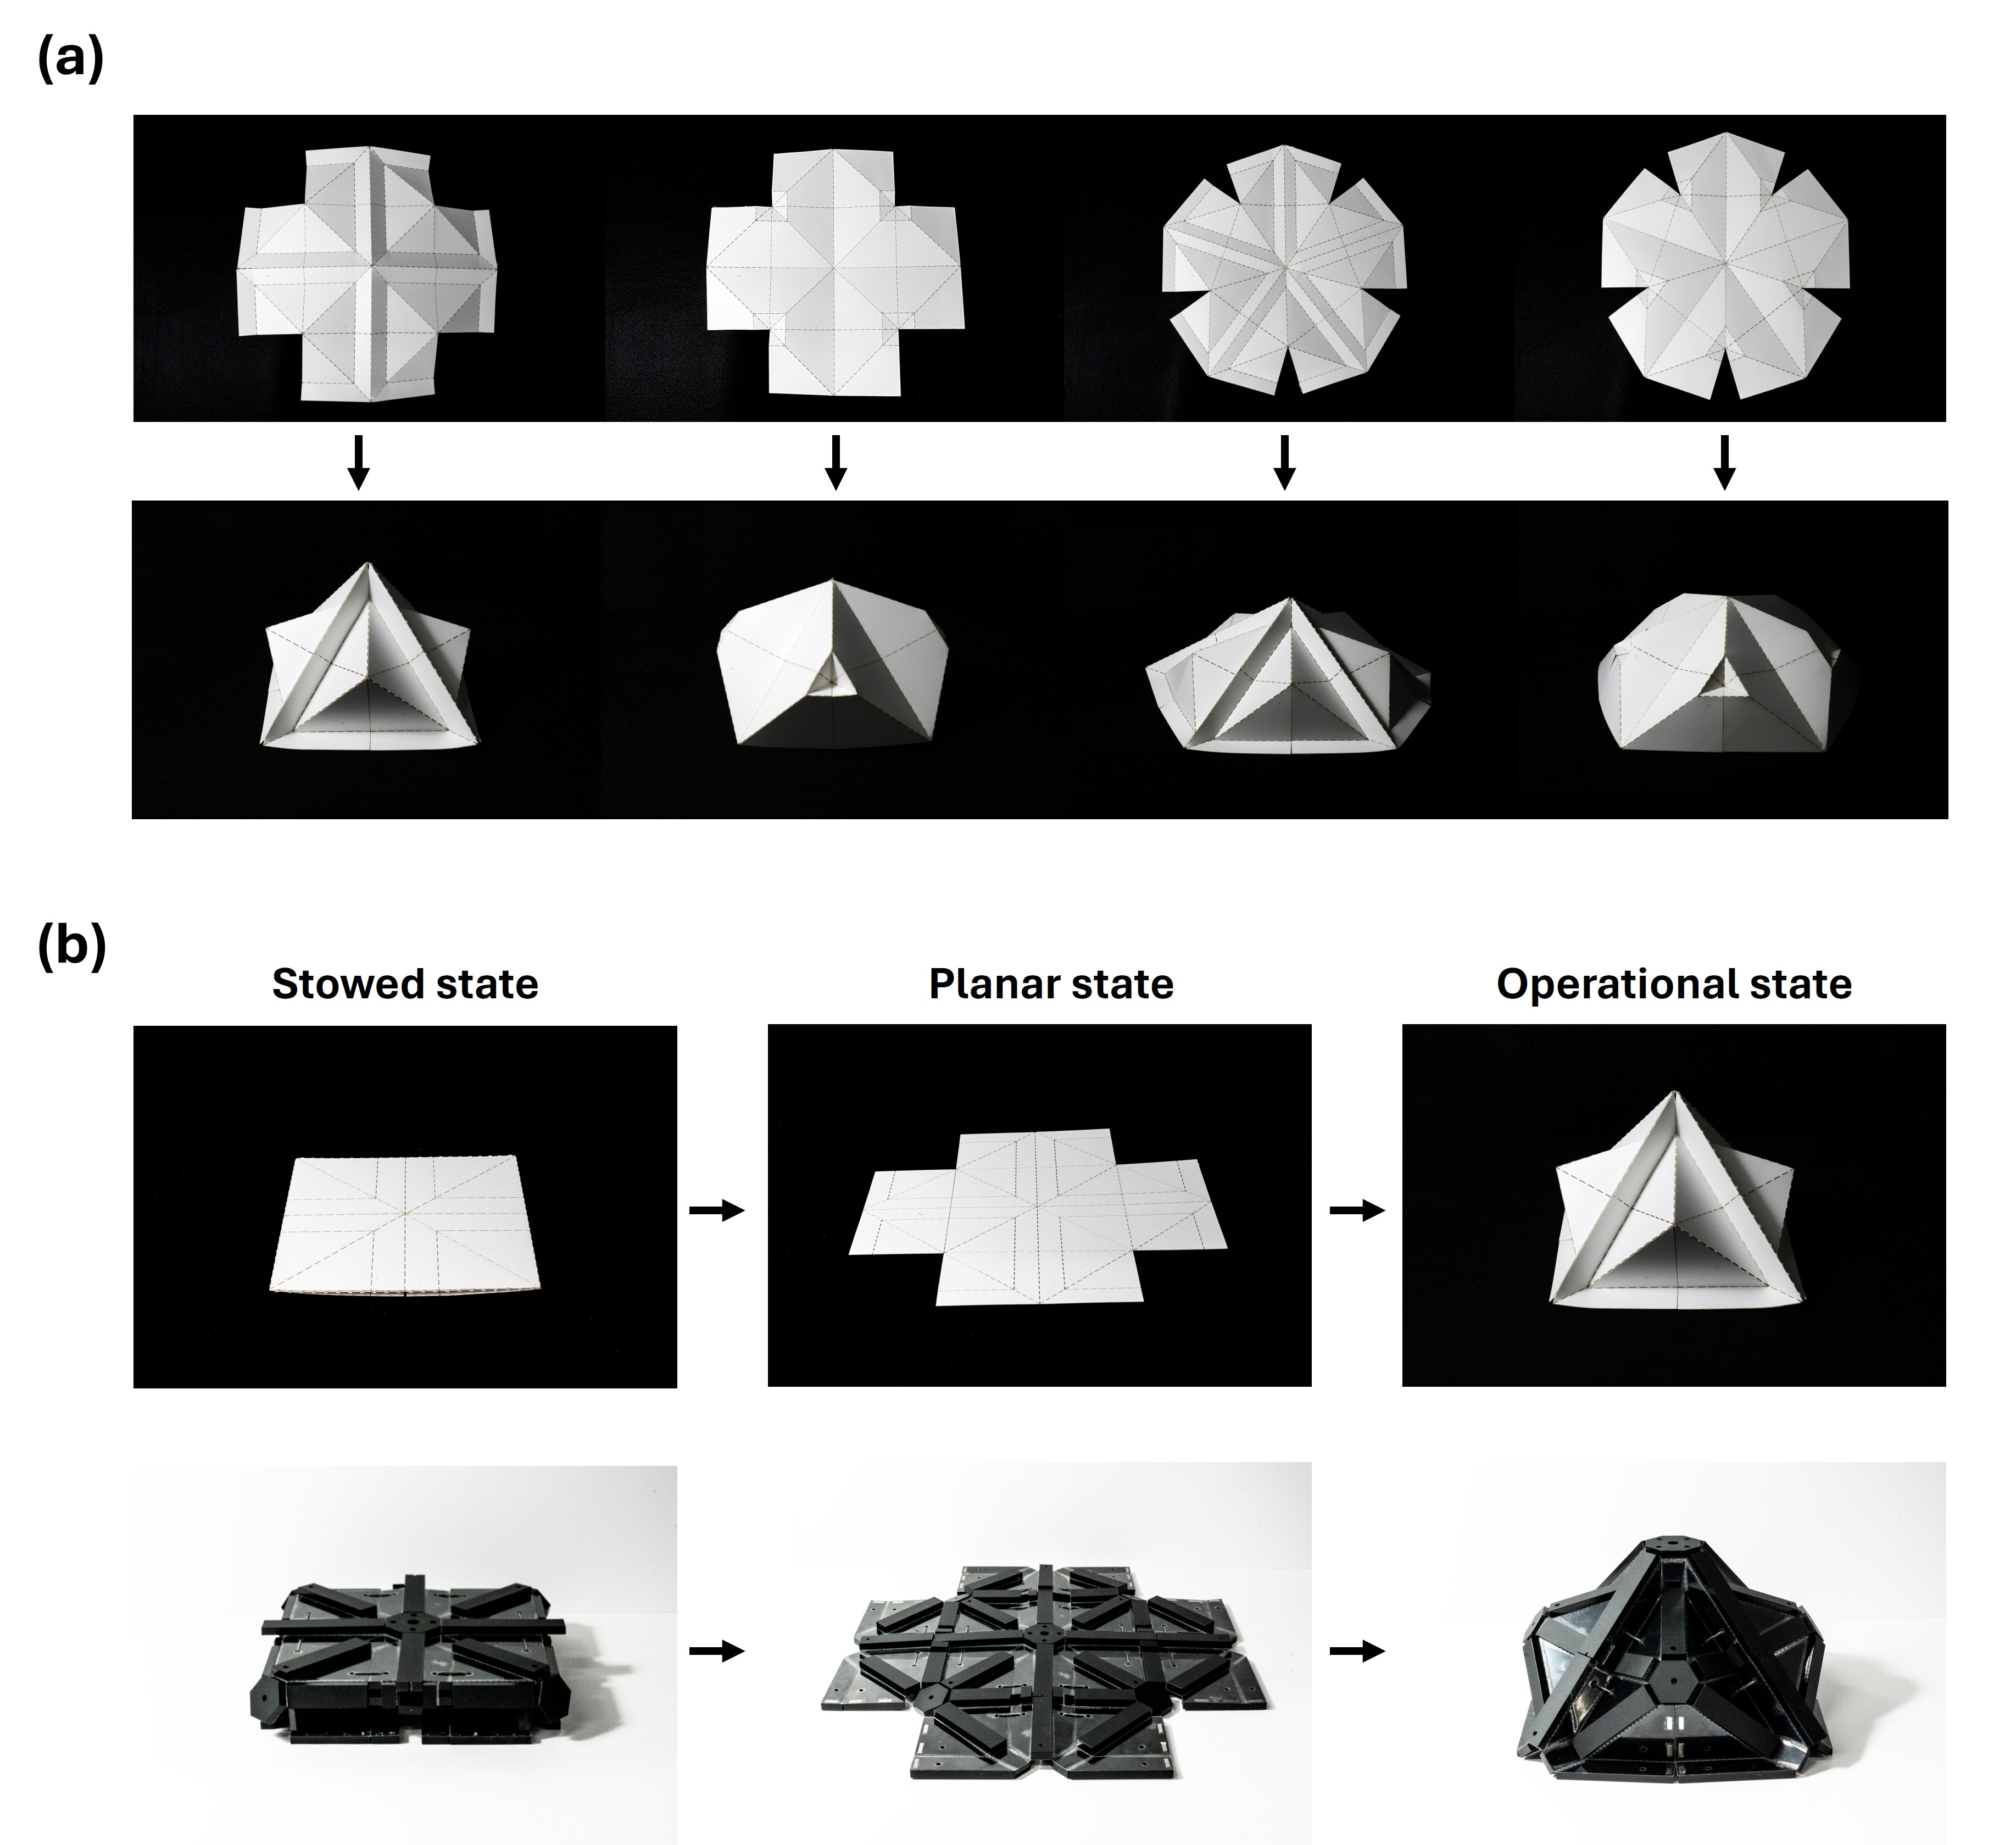 Figure 2. Foundational pattern for the deployable space shelter. (a) Various patterns and operational shapes and (b) the Folding process of paper model and thick-paneled model